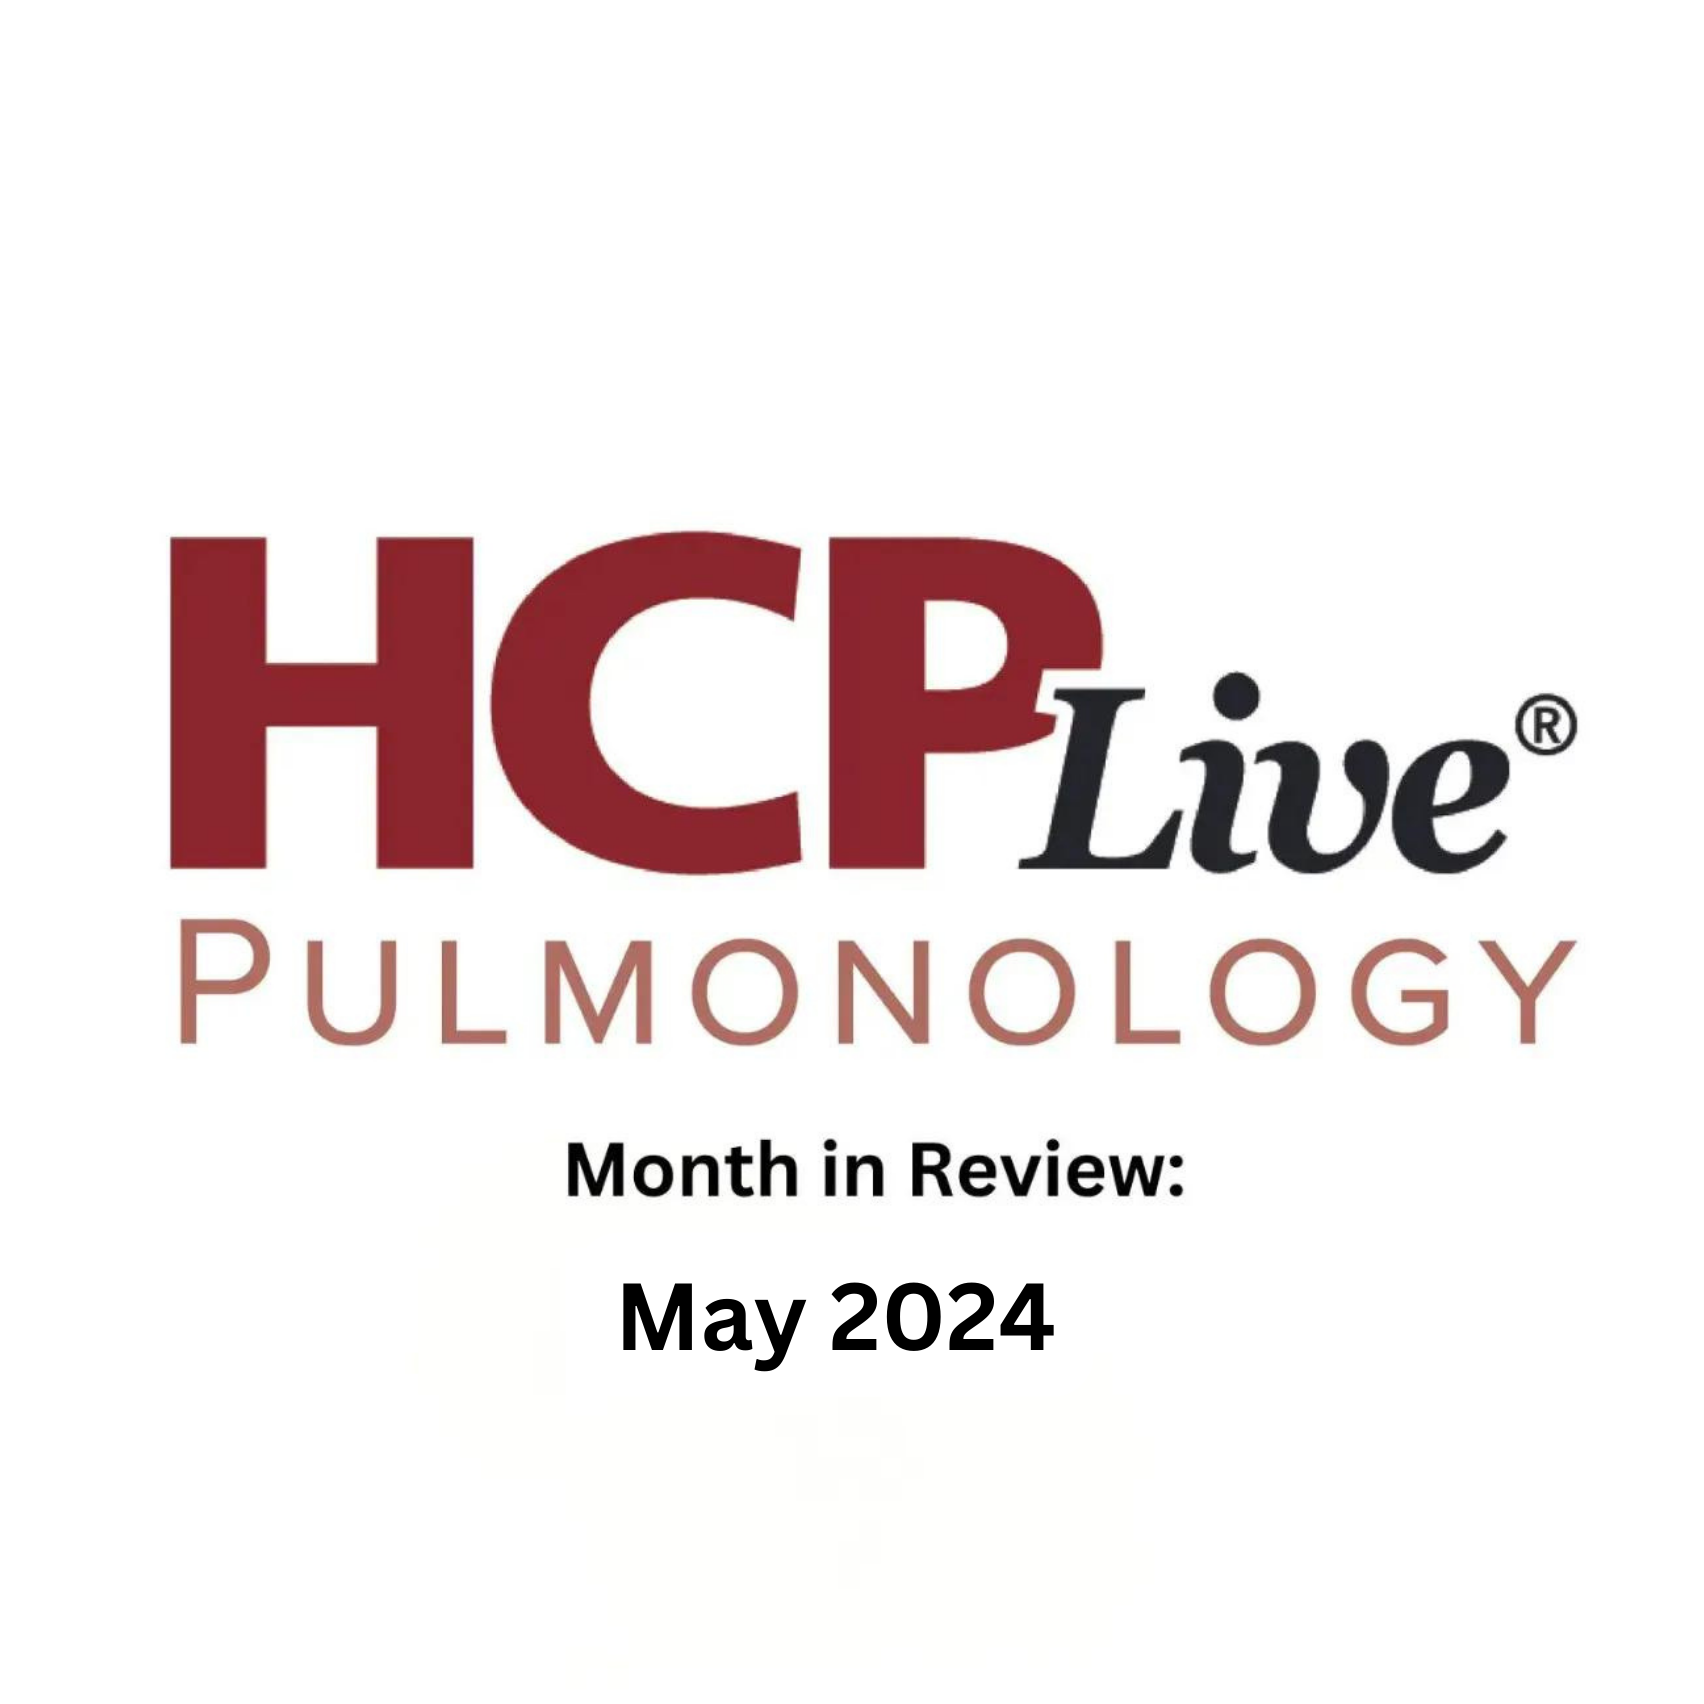 Pulmonology Month in Review: May 2024